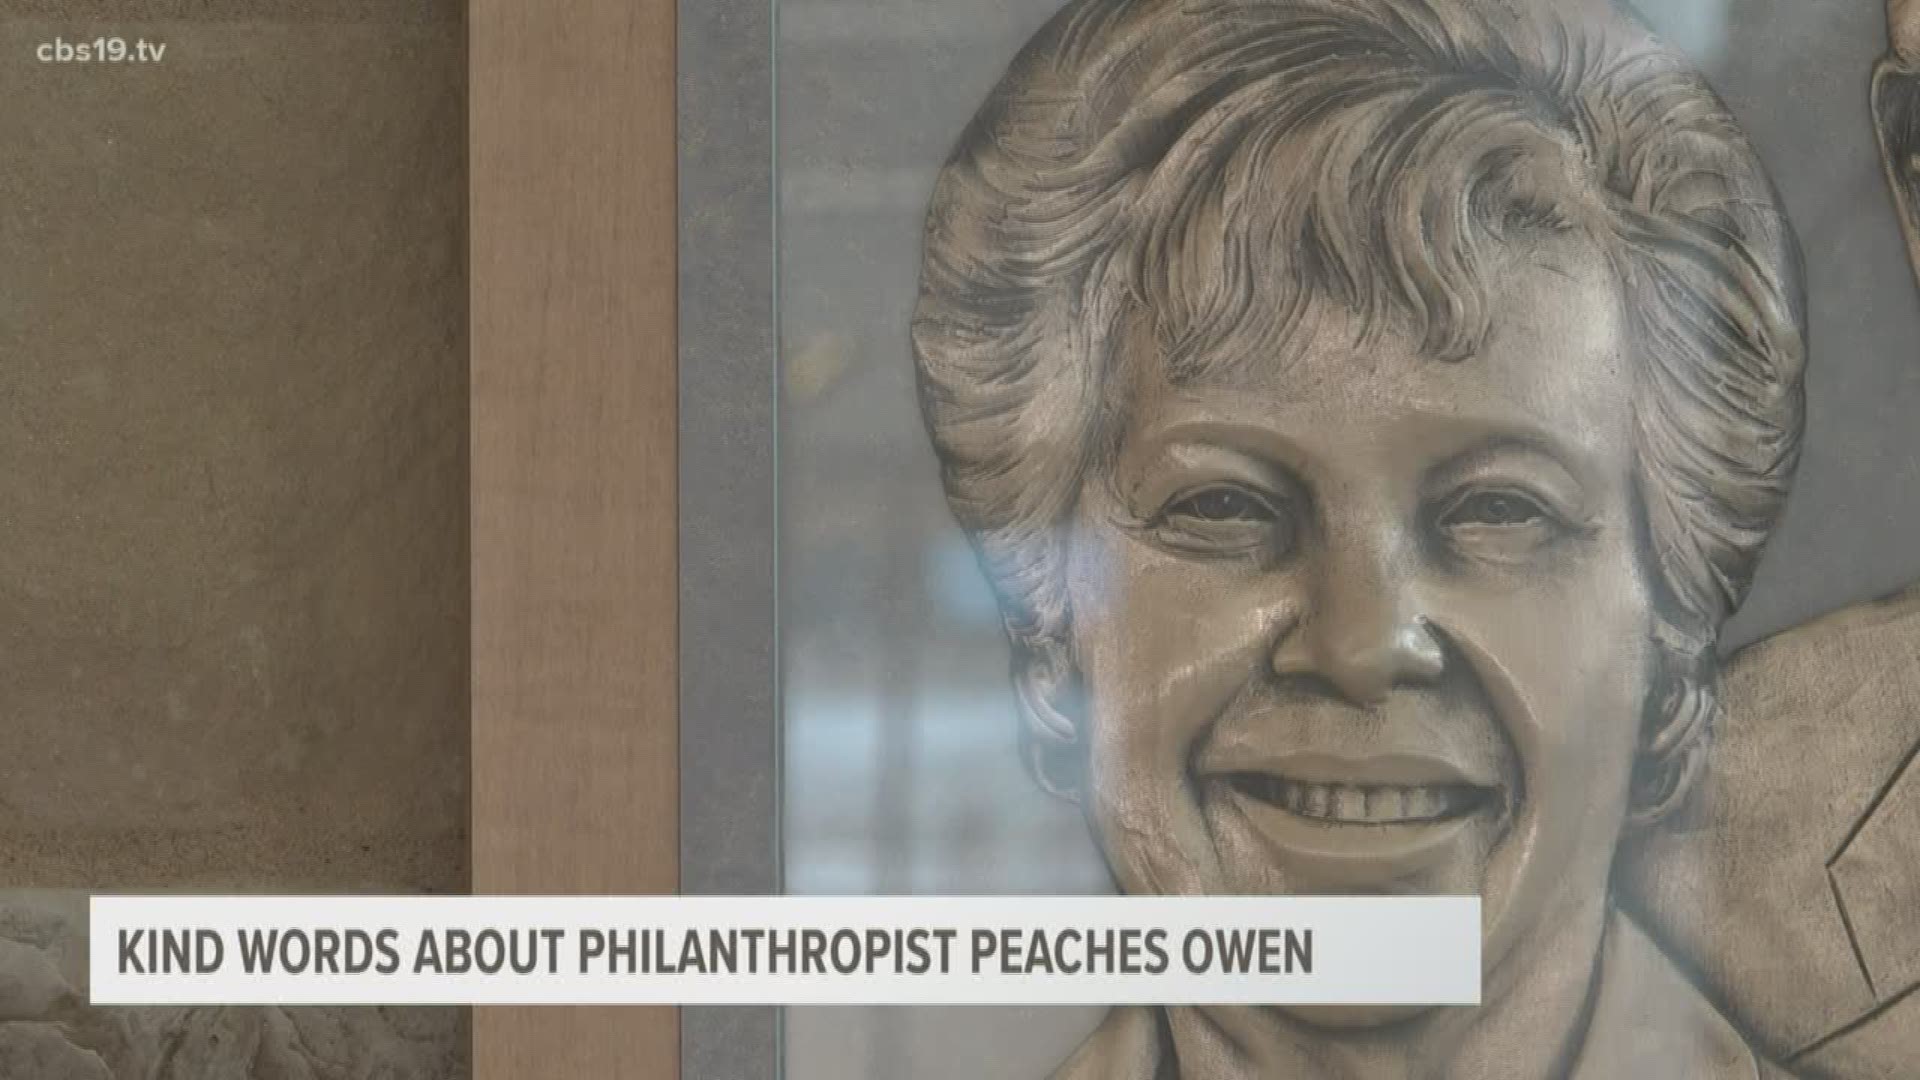 Peaches Owen alongside her husband Louis left behind a legacy of encouragement and philanthropy in East Texas.